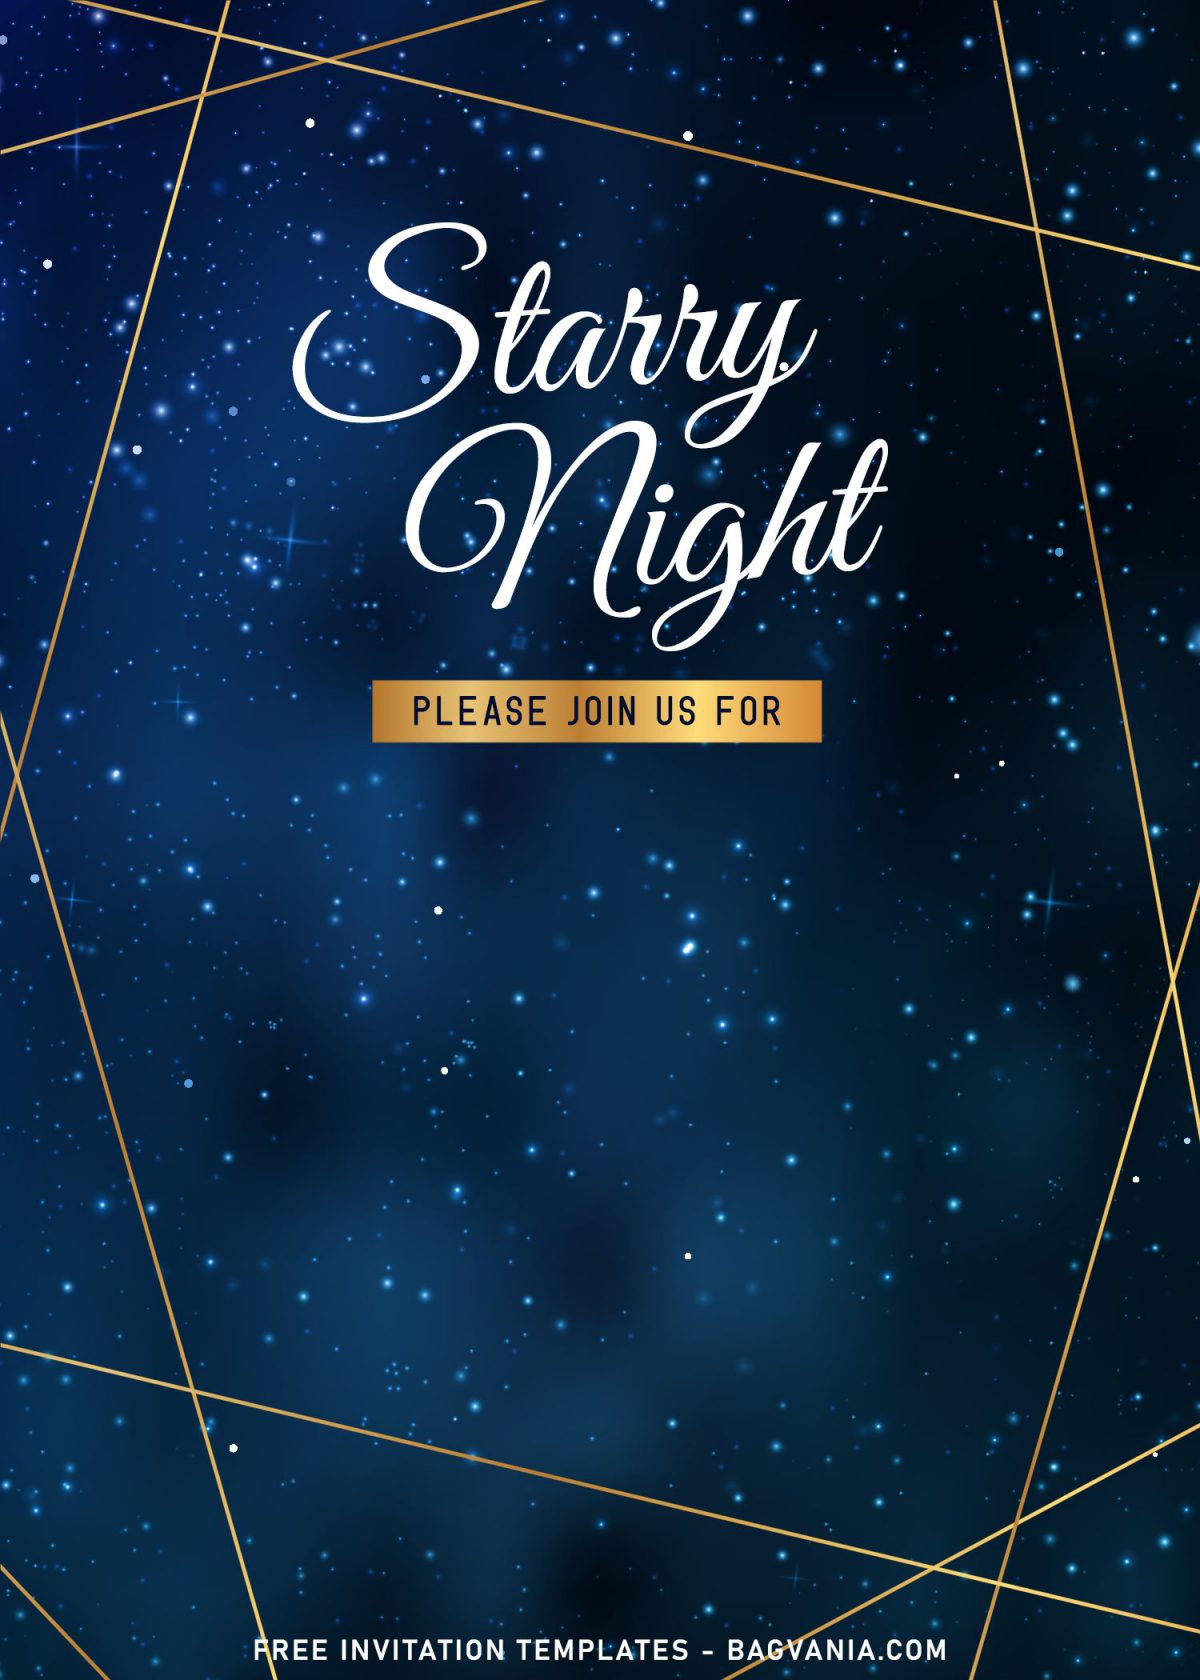 8+ Sparkling Starry Night Birthday Invitation Templates and has Starry Night background